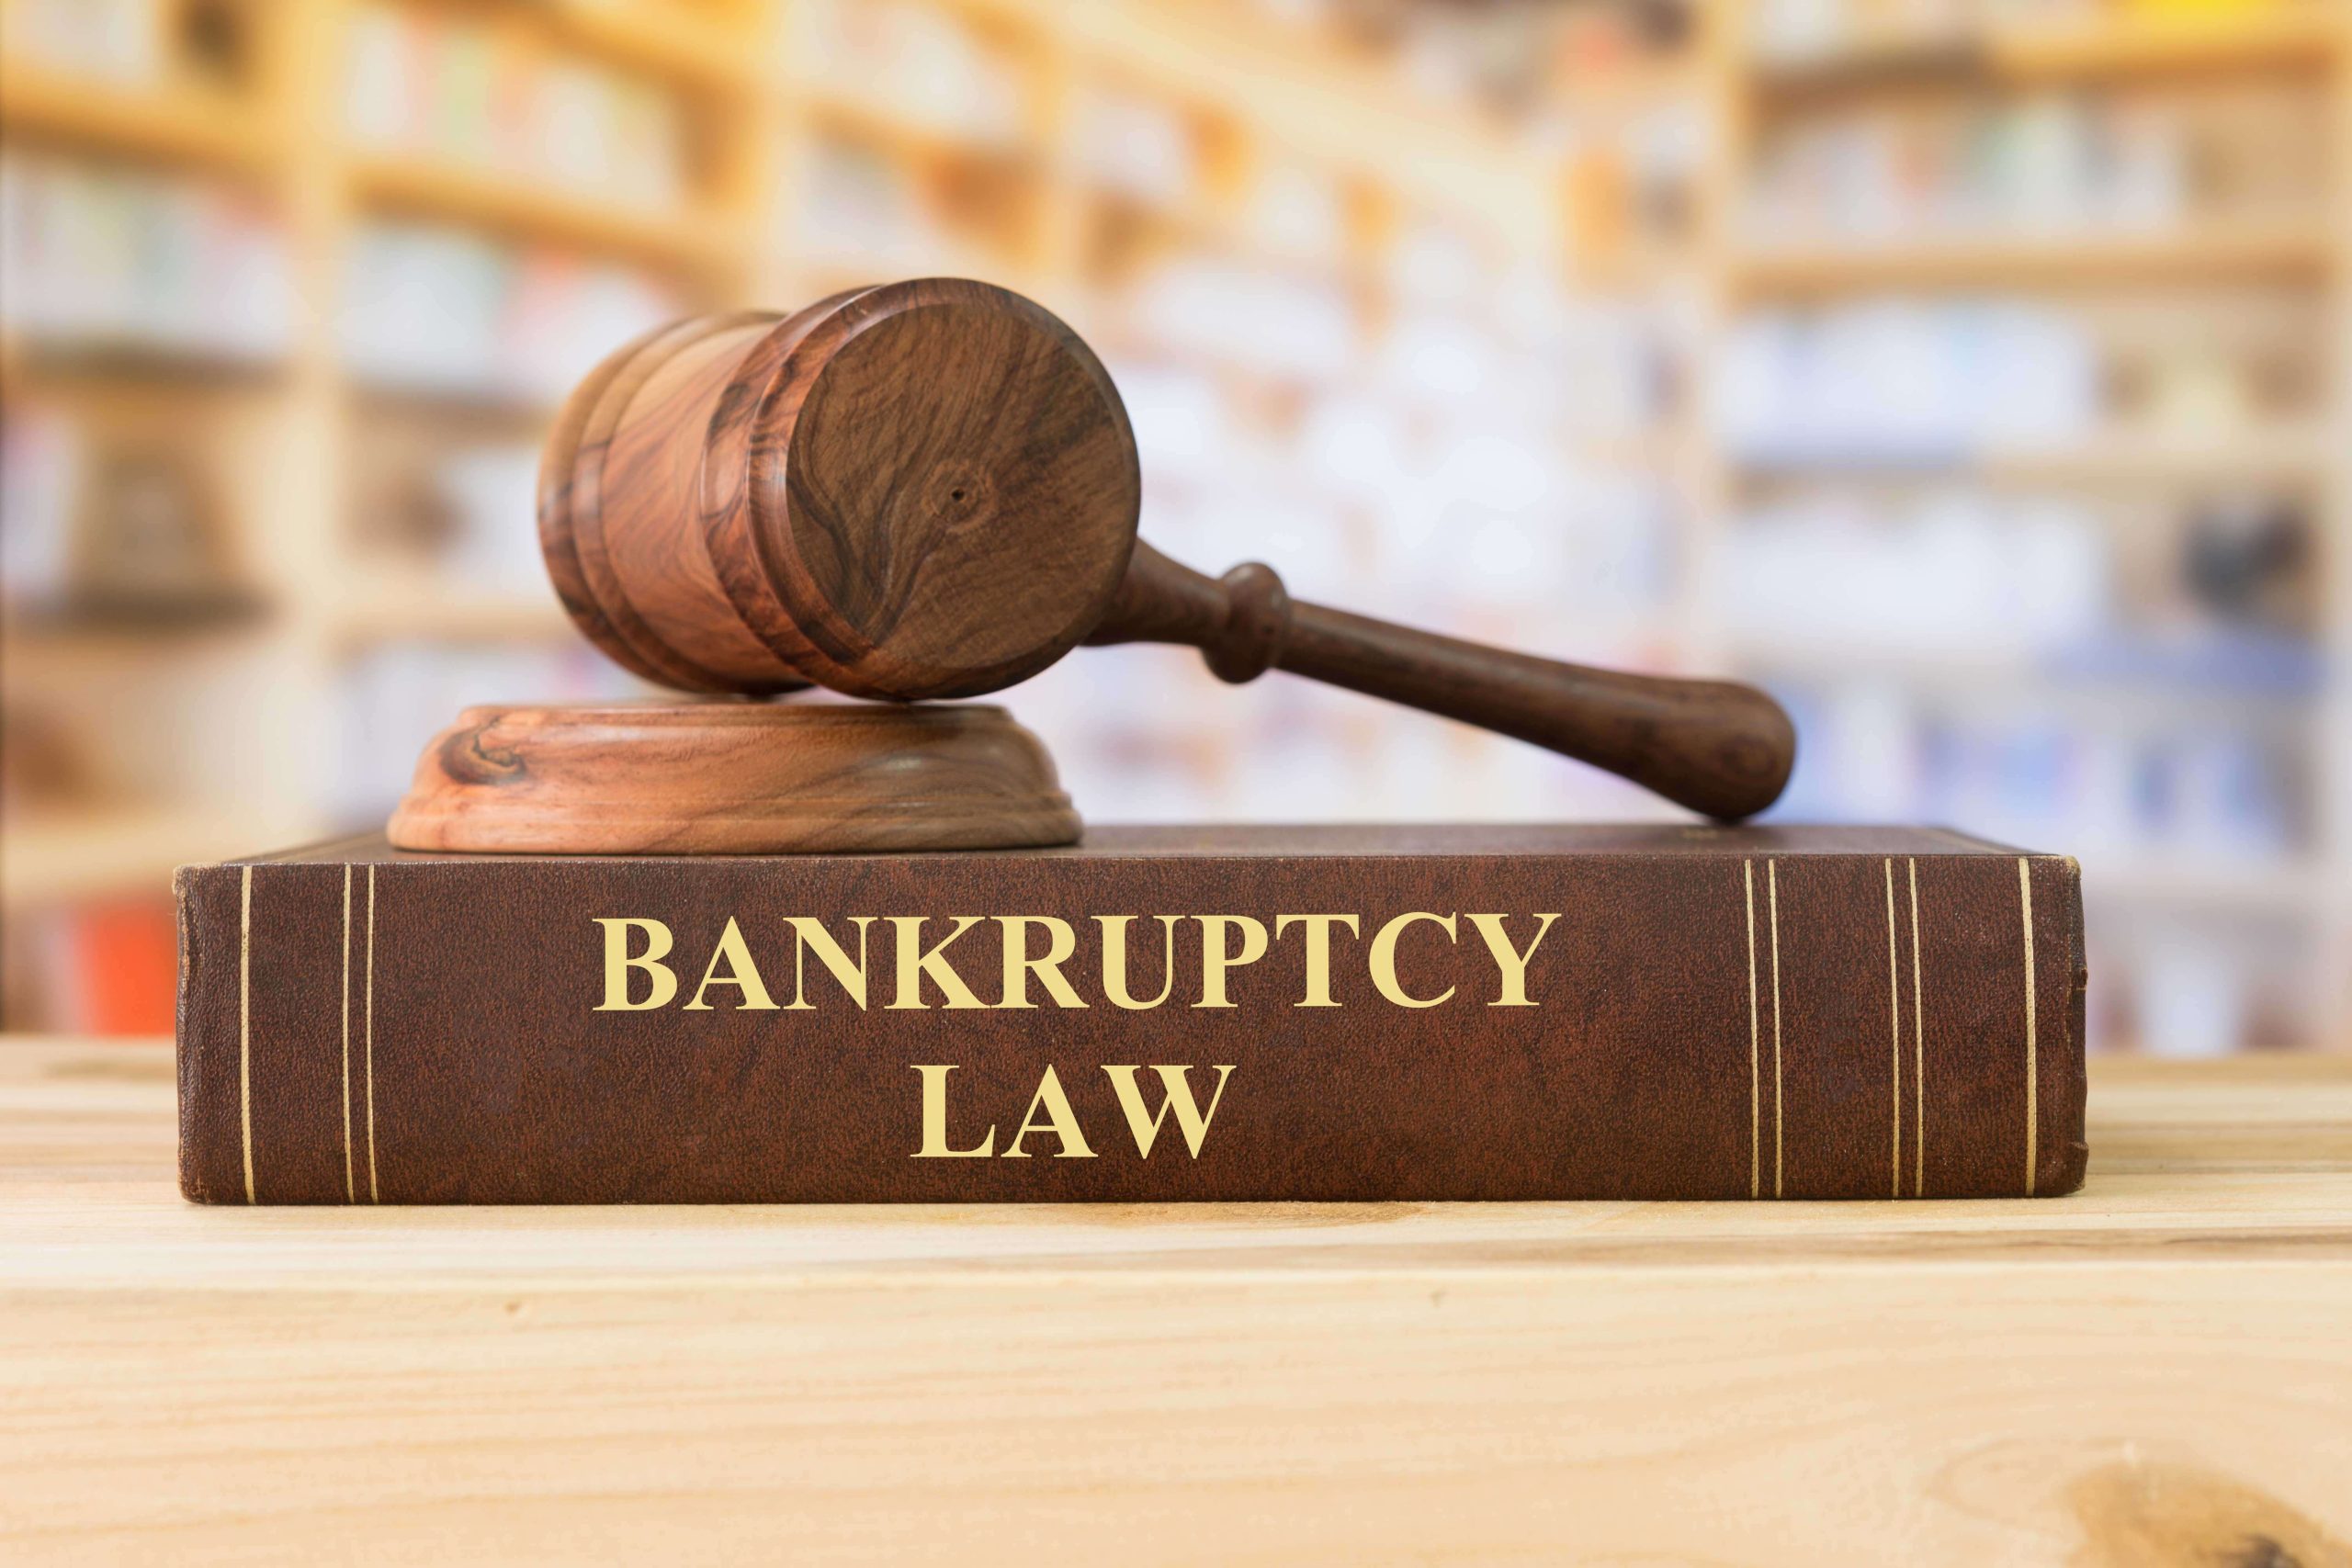 Expert bankruptcy law firm in Cheyenne, WY - contact us for assistance.